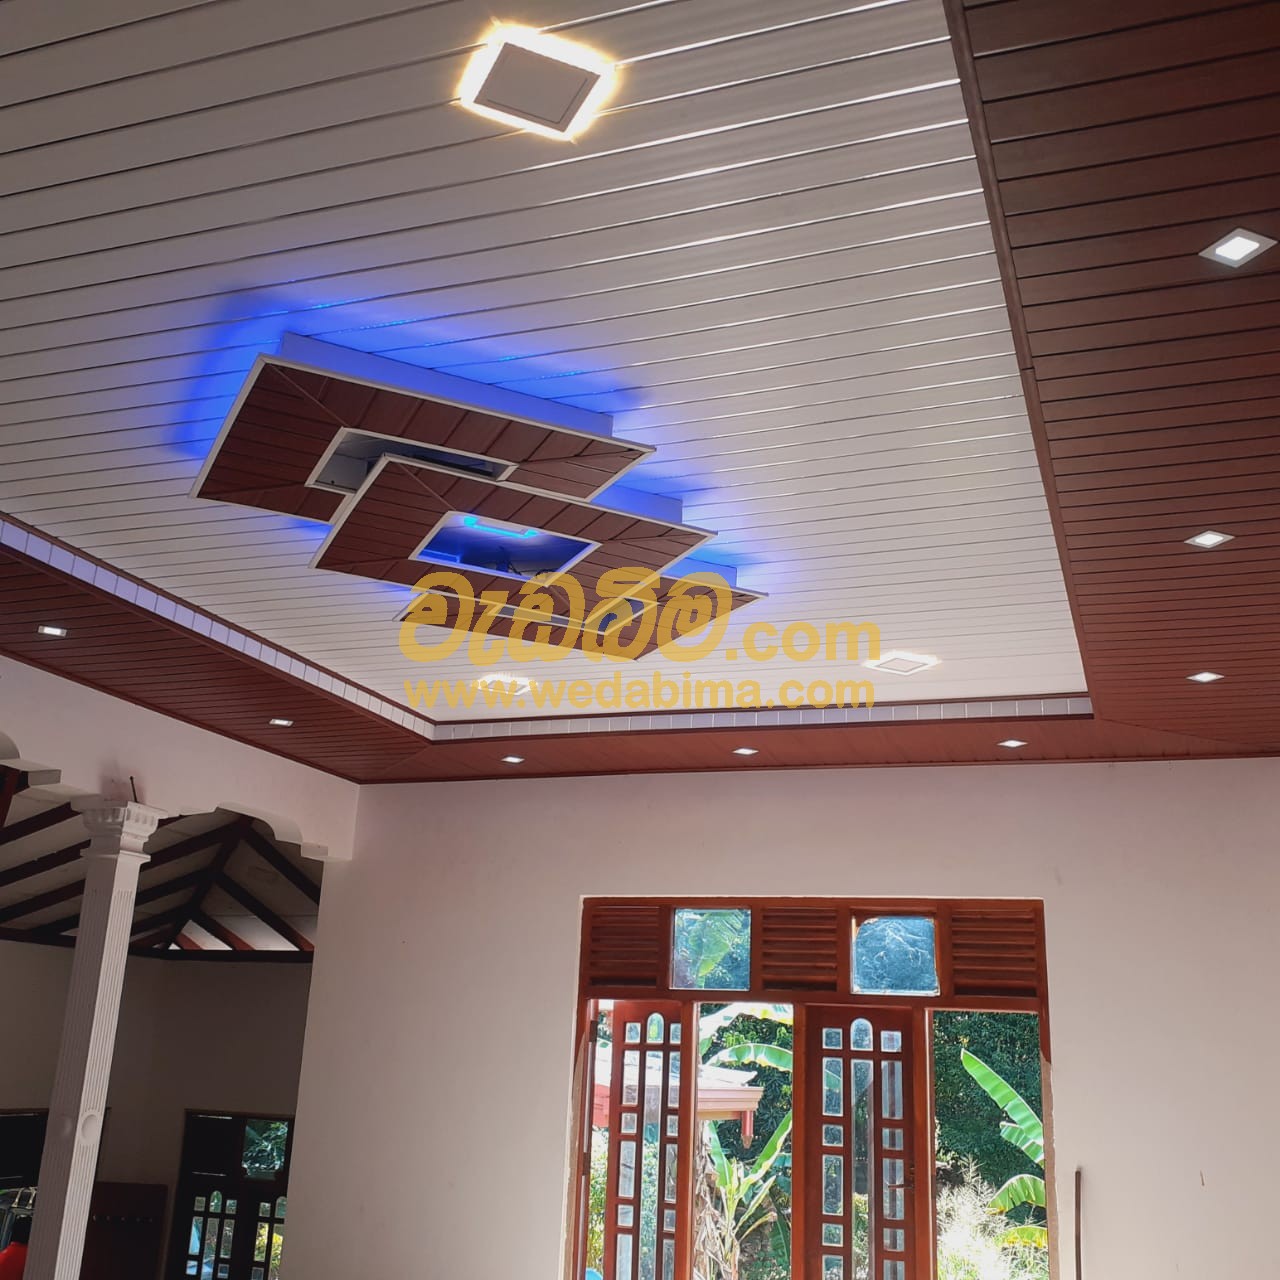 Cover image for Ceiling Contractors - Ampara